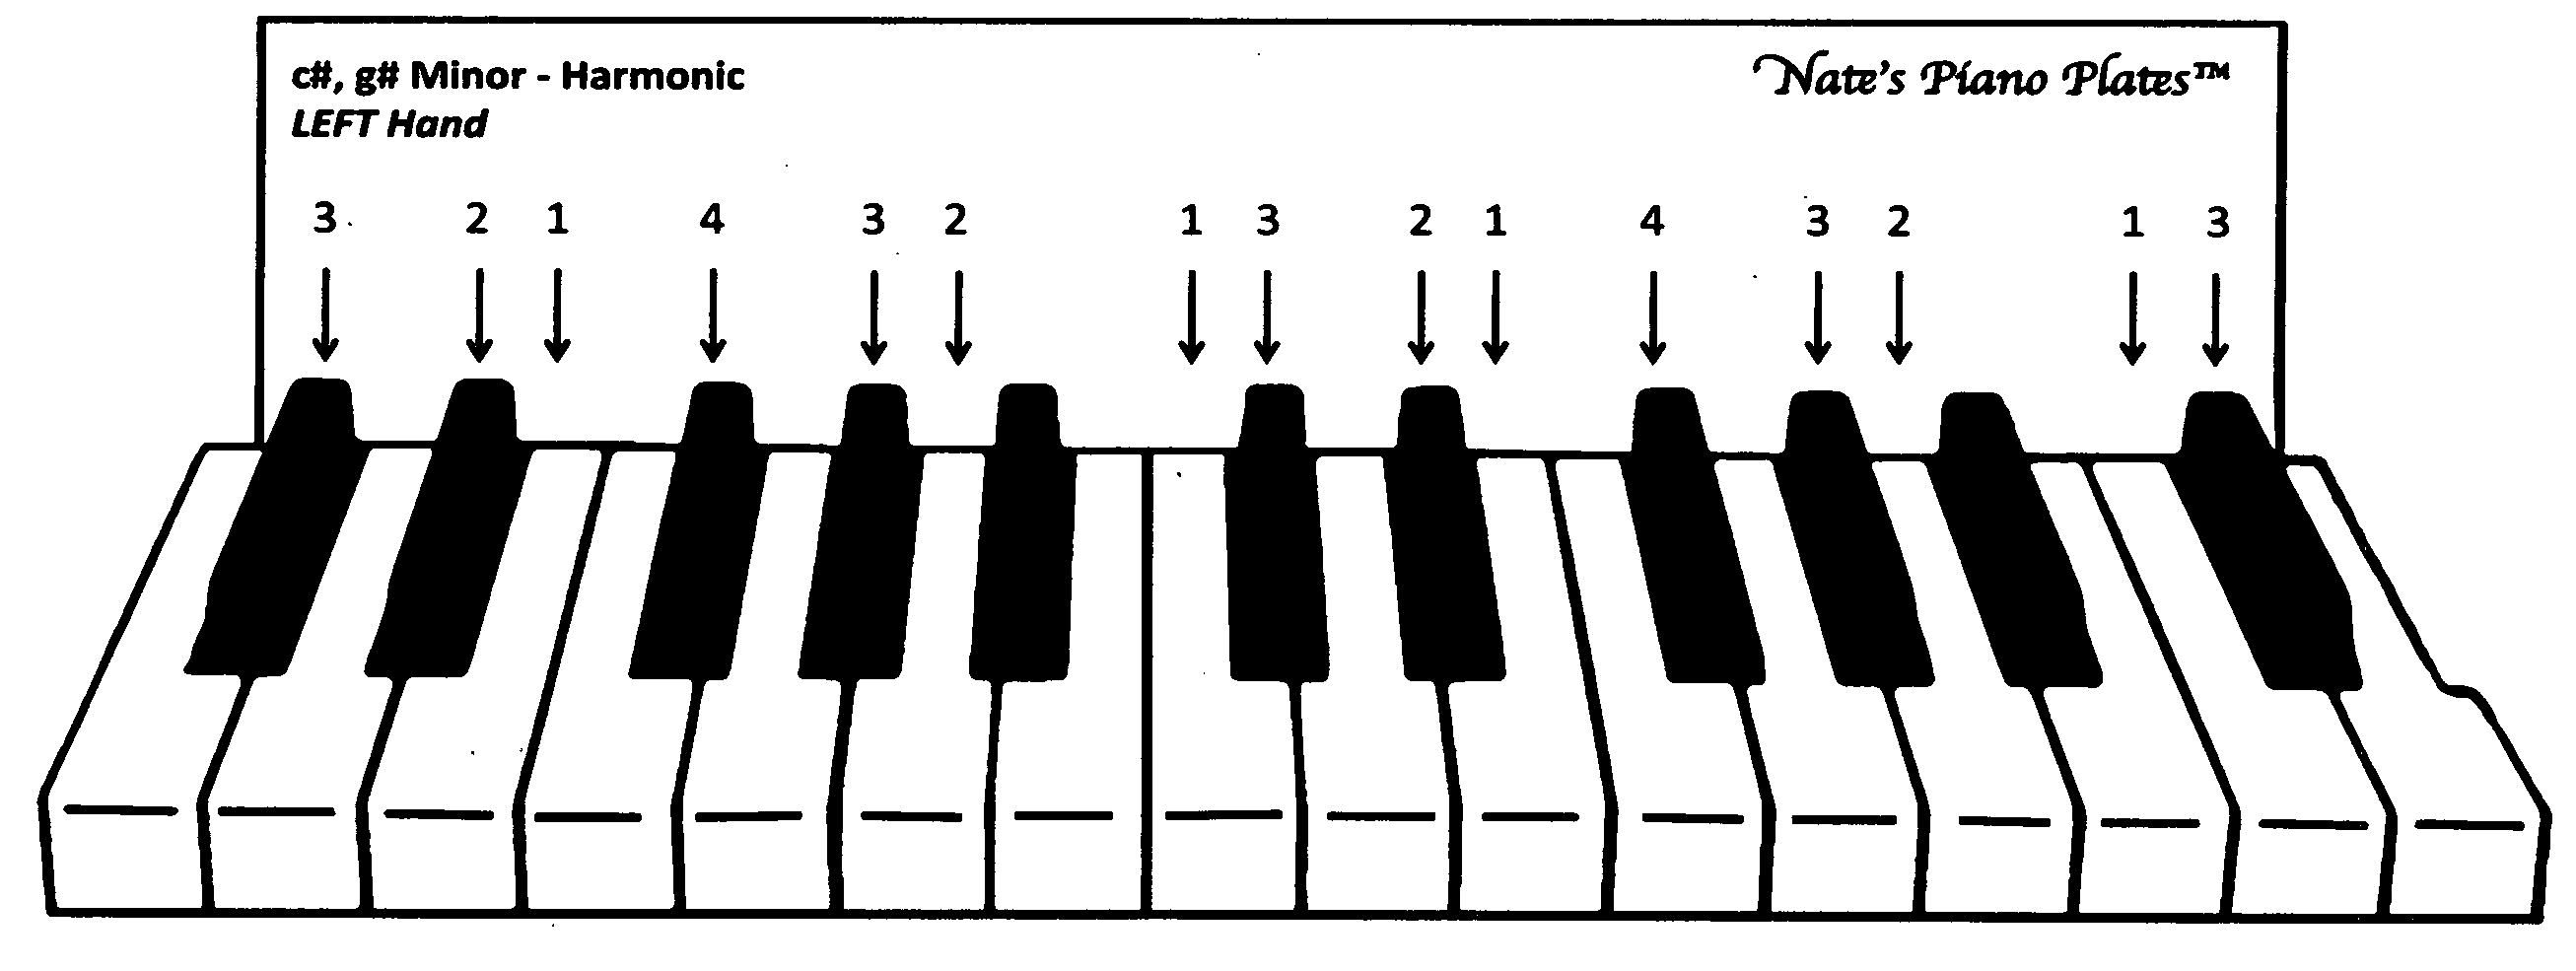 Easy Visual Training Templates to Teach Piano Scale Fingering Sequences